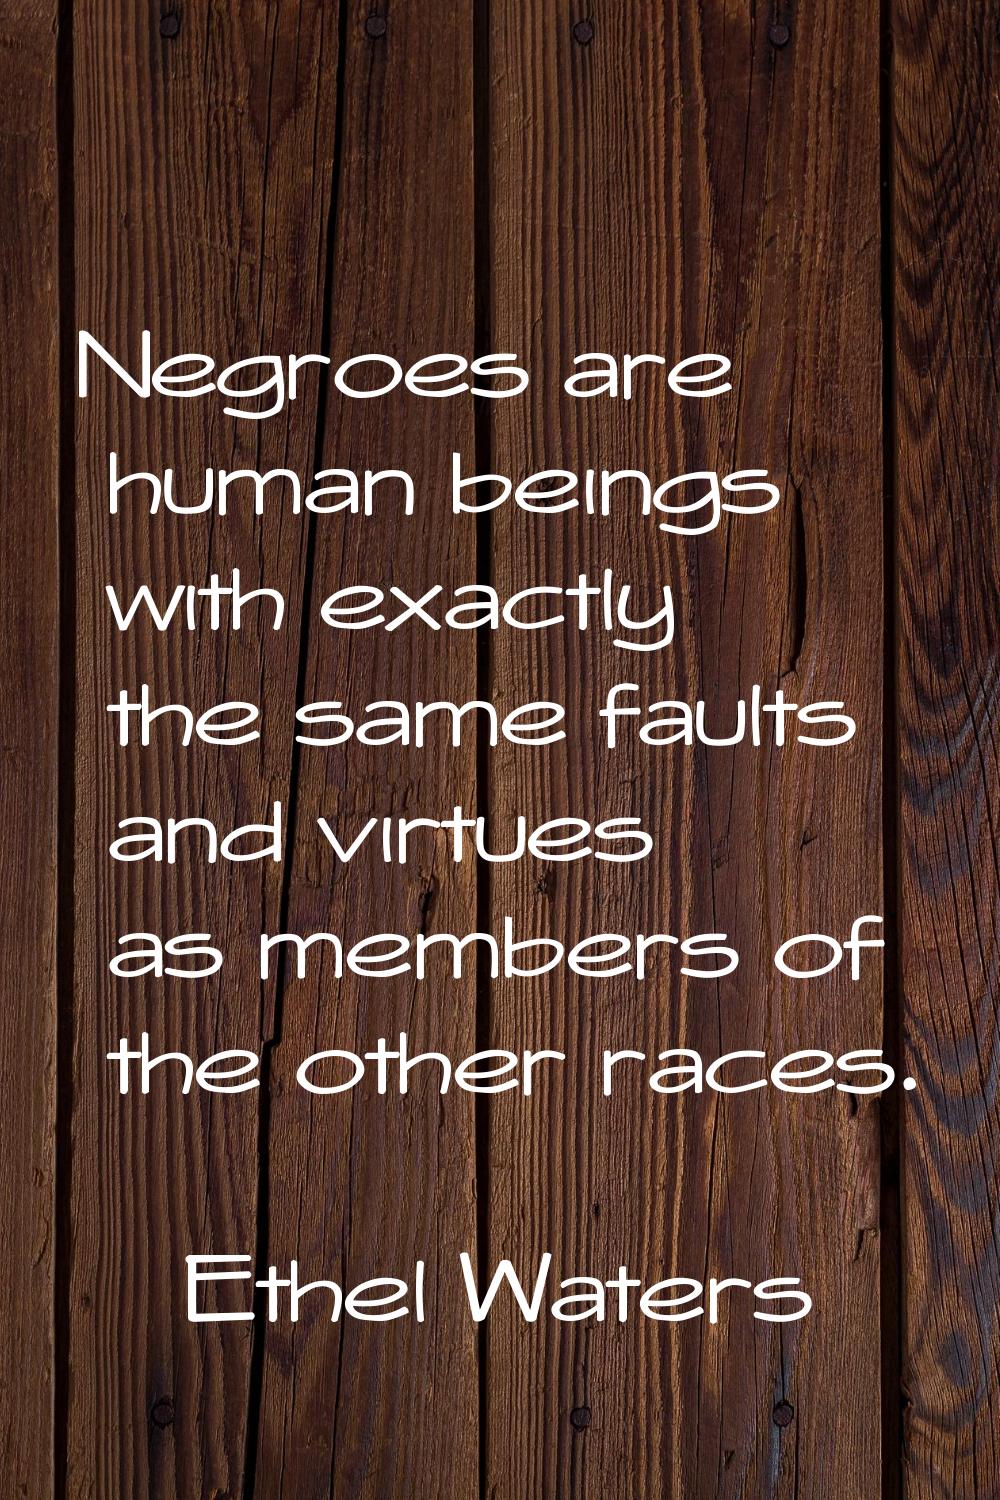 Negroes are human beings with exactly the same faults and virtues as members of the other races.